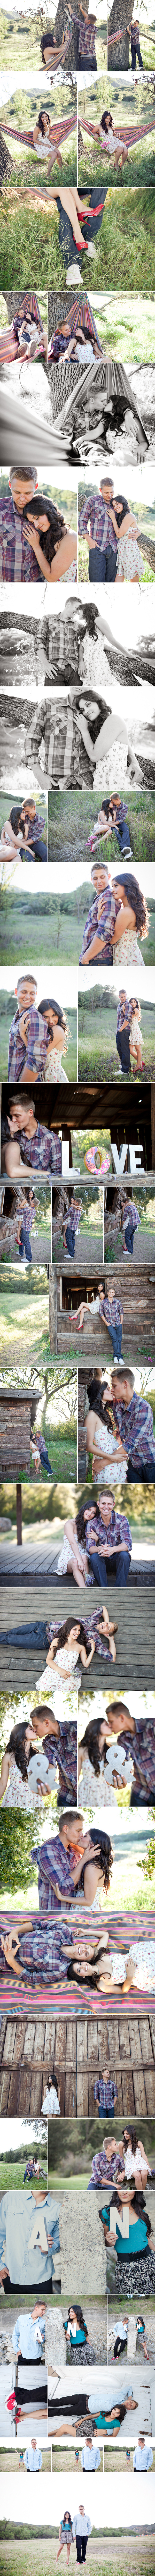 rustic engagement session with hammock